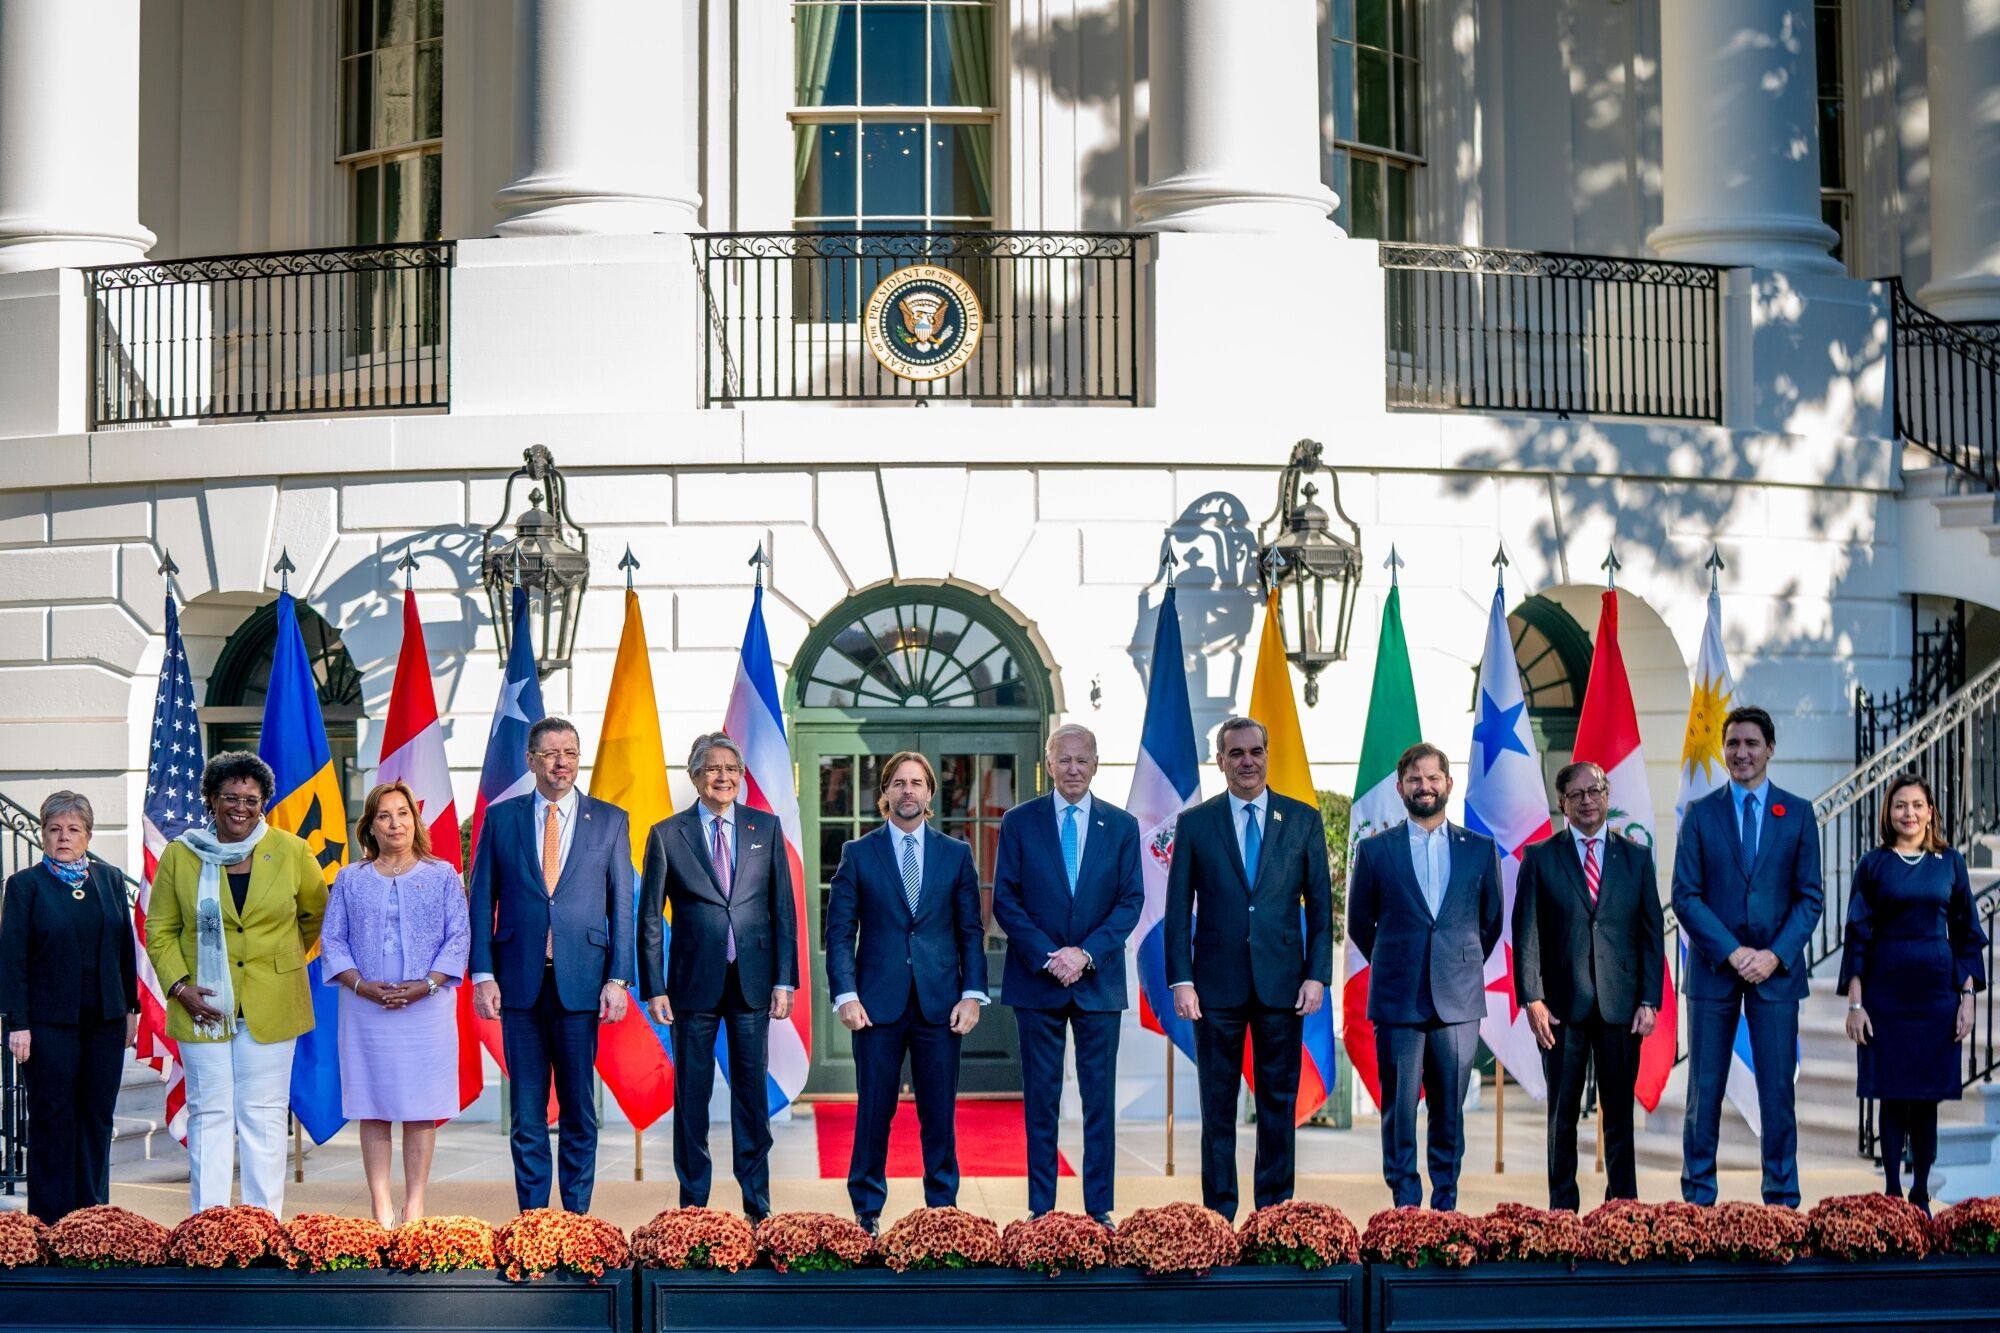 US President Joe Biden, (centre right) with other leaders and officials at the inaugural Americas Partnership for Economic Prosperity (Apep) at the White House on Friday. Photo: EPA/Bloomberg